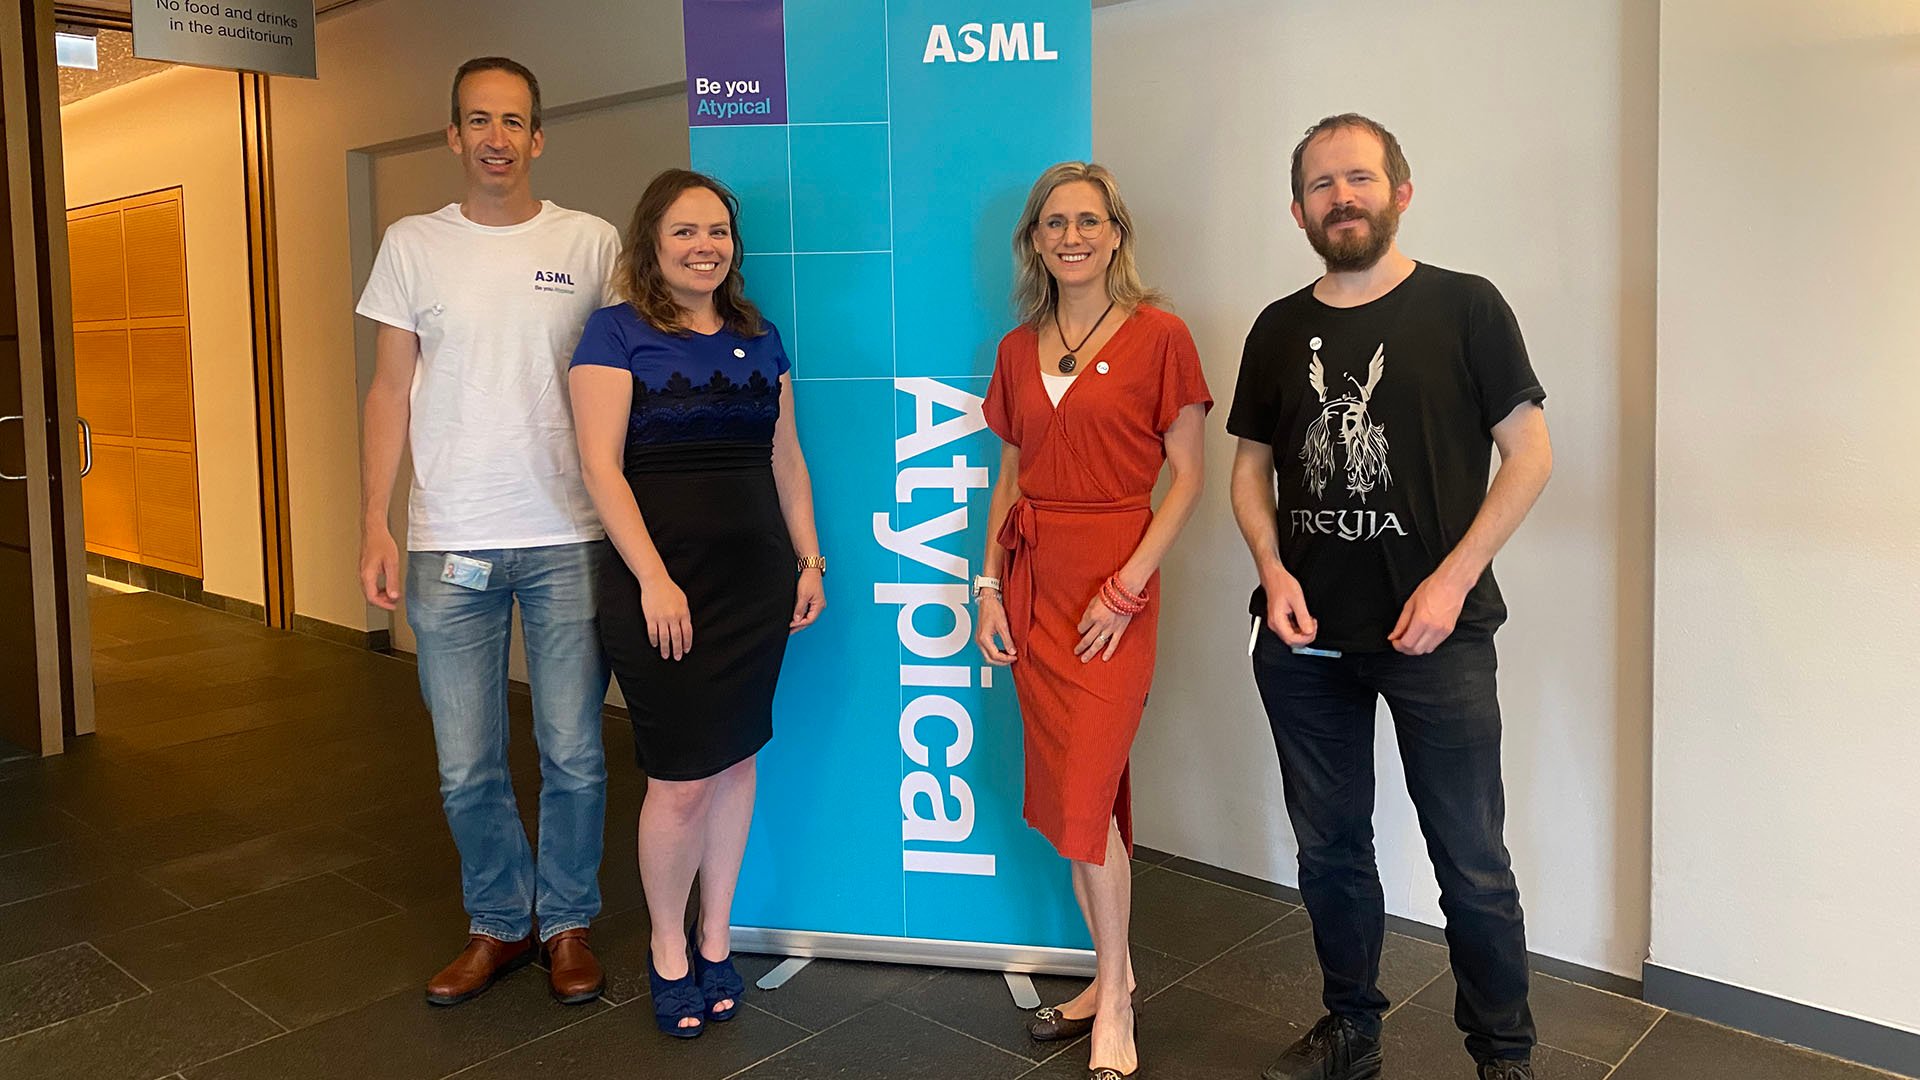 ASML neurodiversity employee network board members stand next to a banner bearing the name ‘Atypical’.